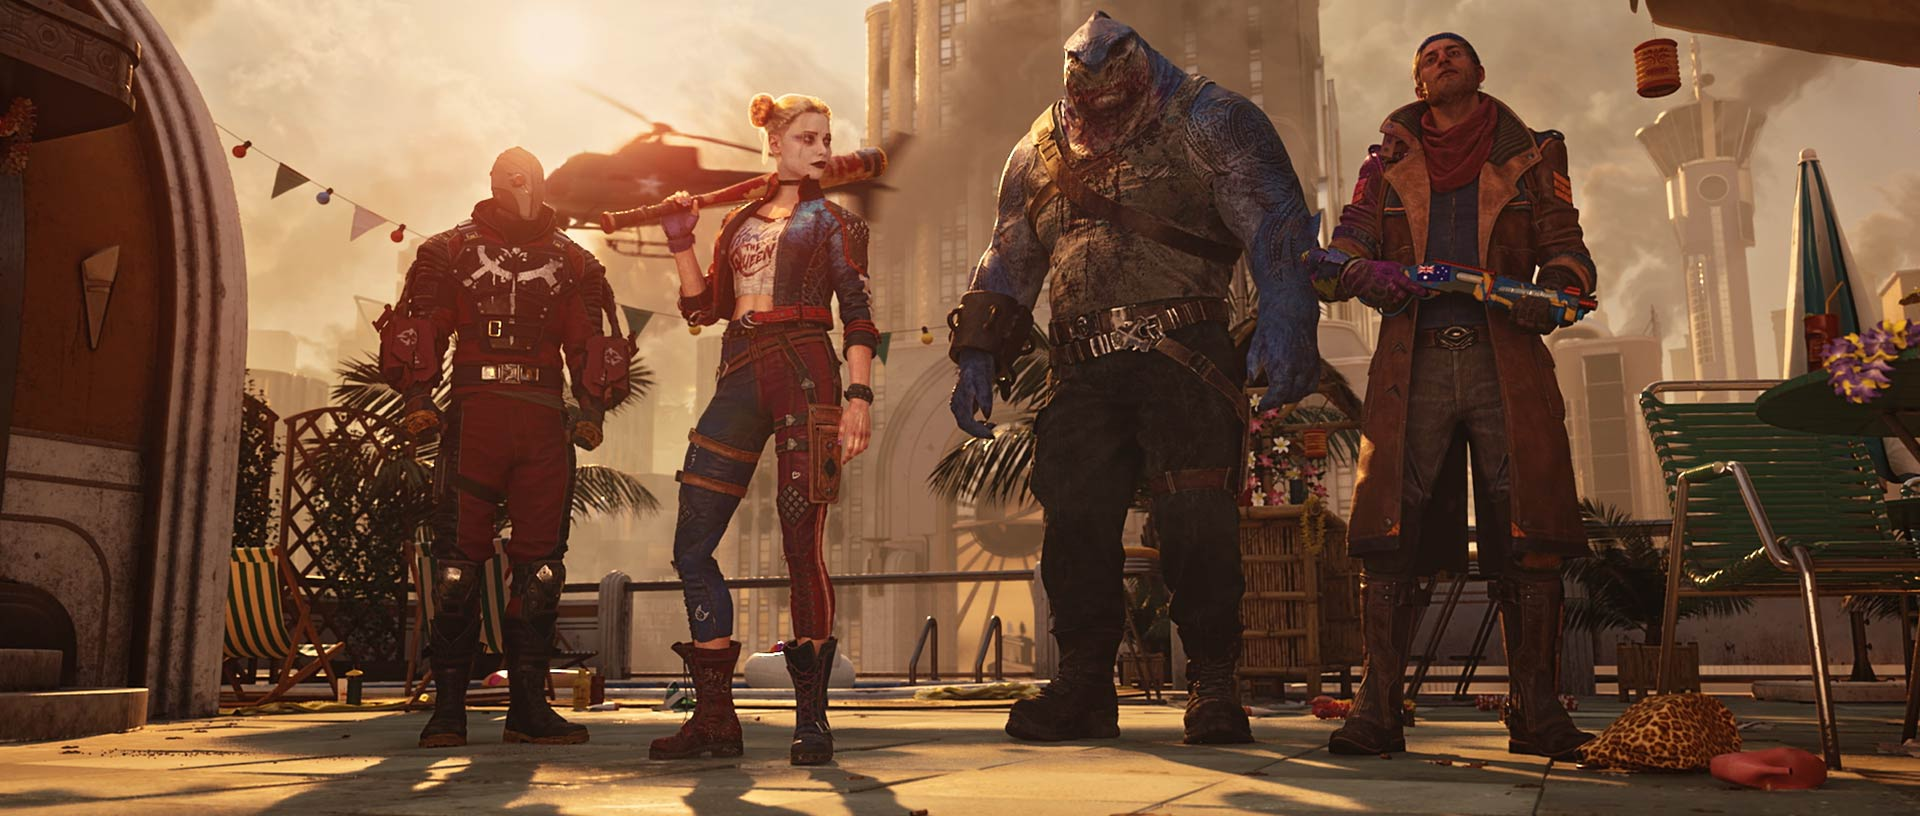 A screenshot from Suicide Squad: Kill the Justice League featuring Harley Quinn, Deadshot, King Shark, and Captain Boomerang